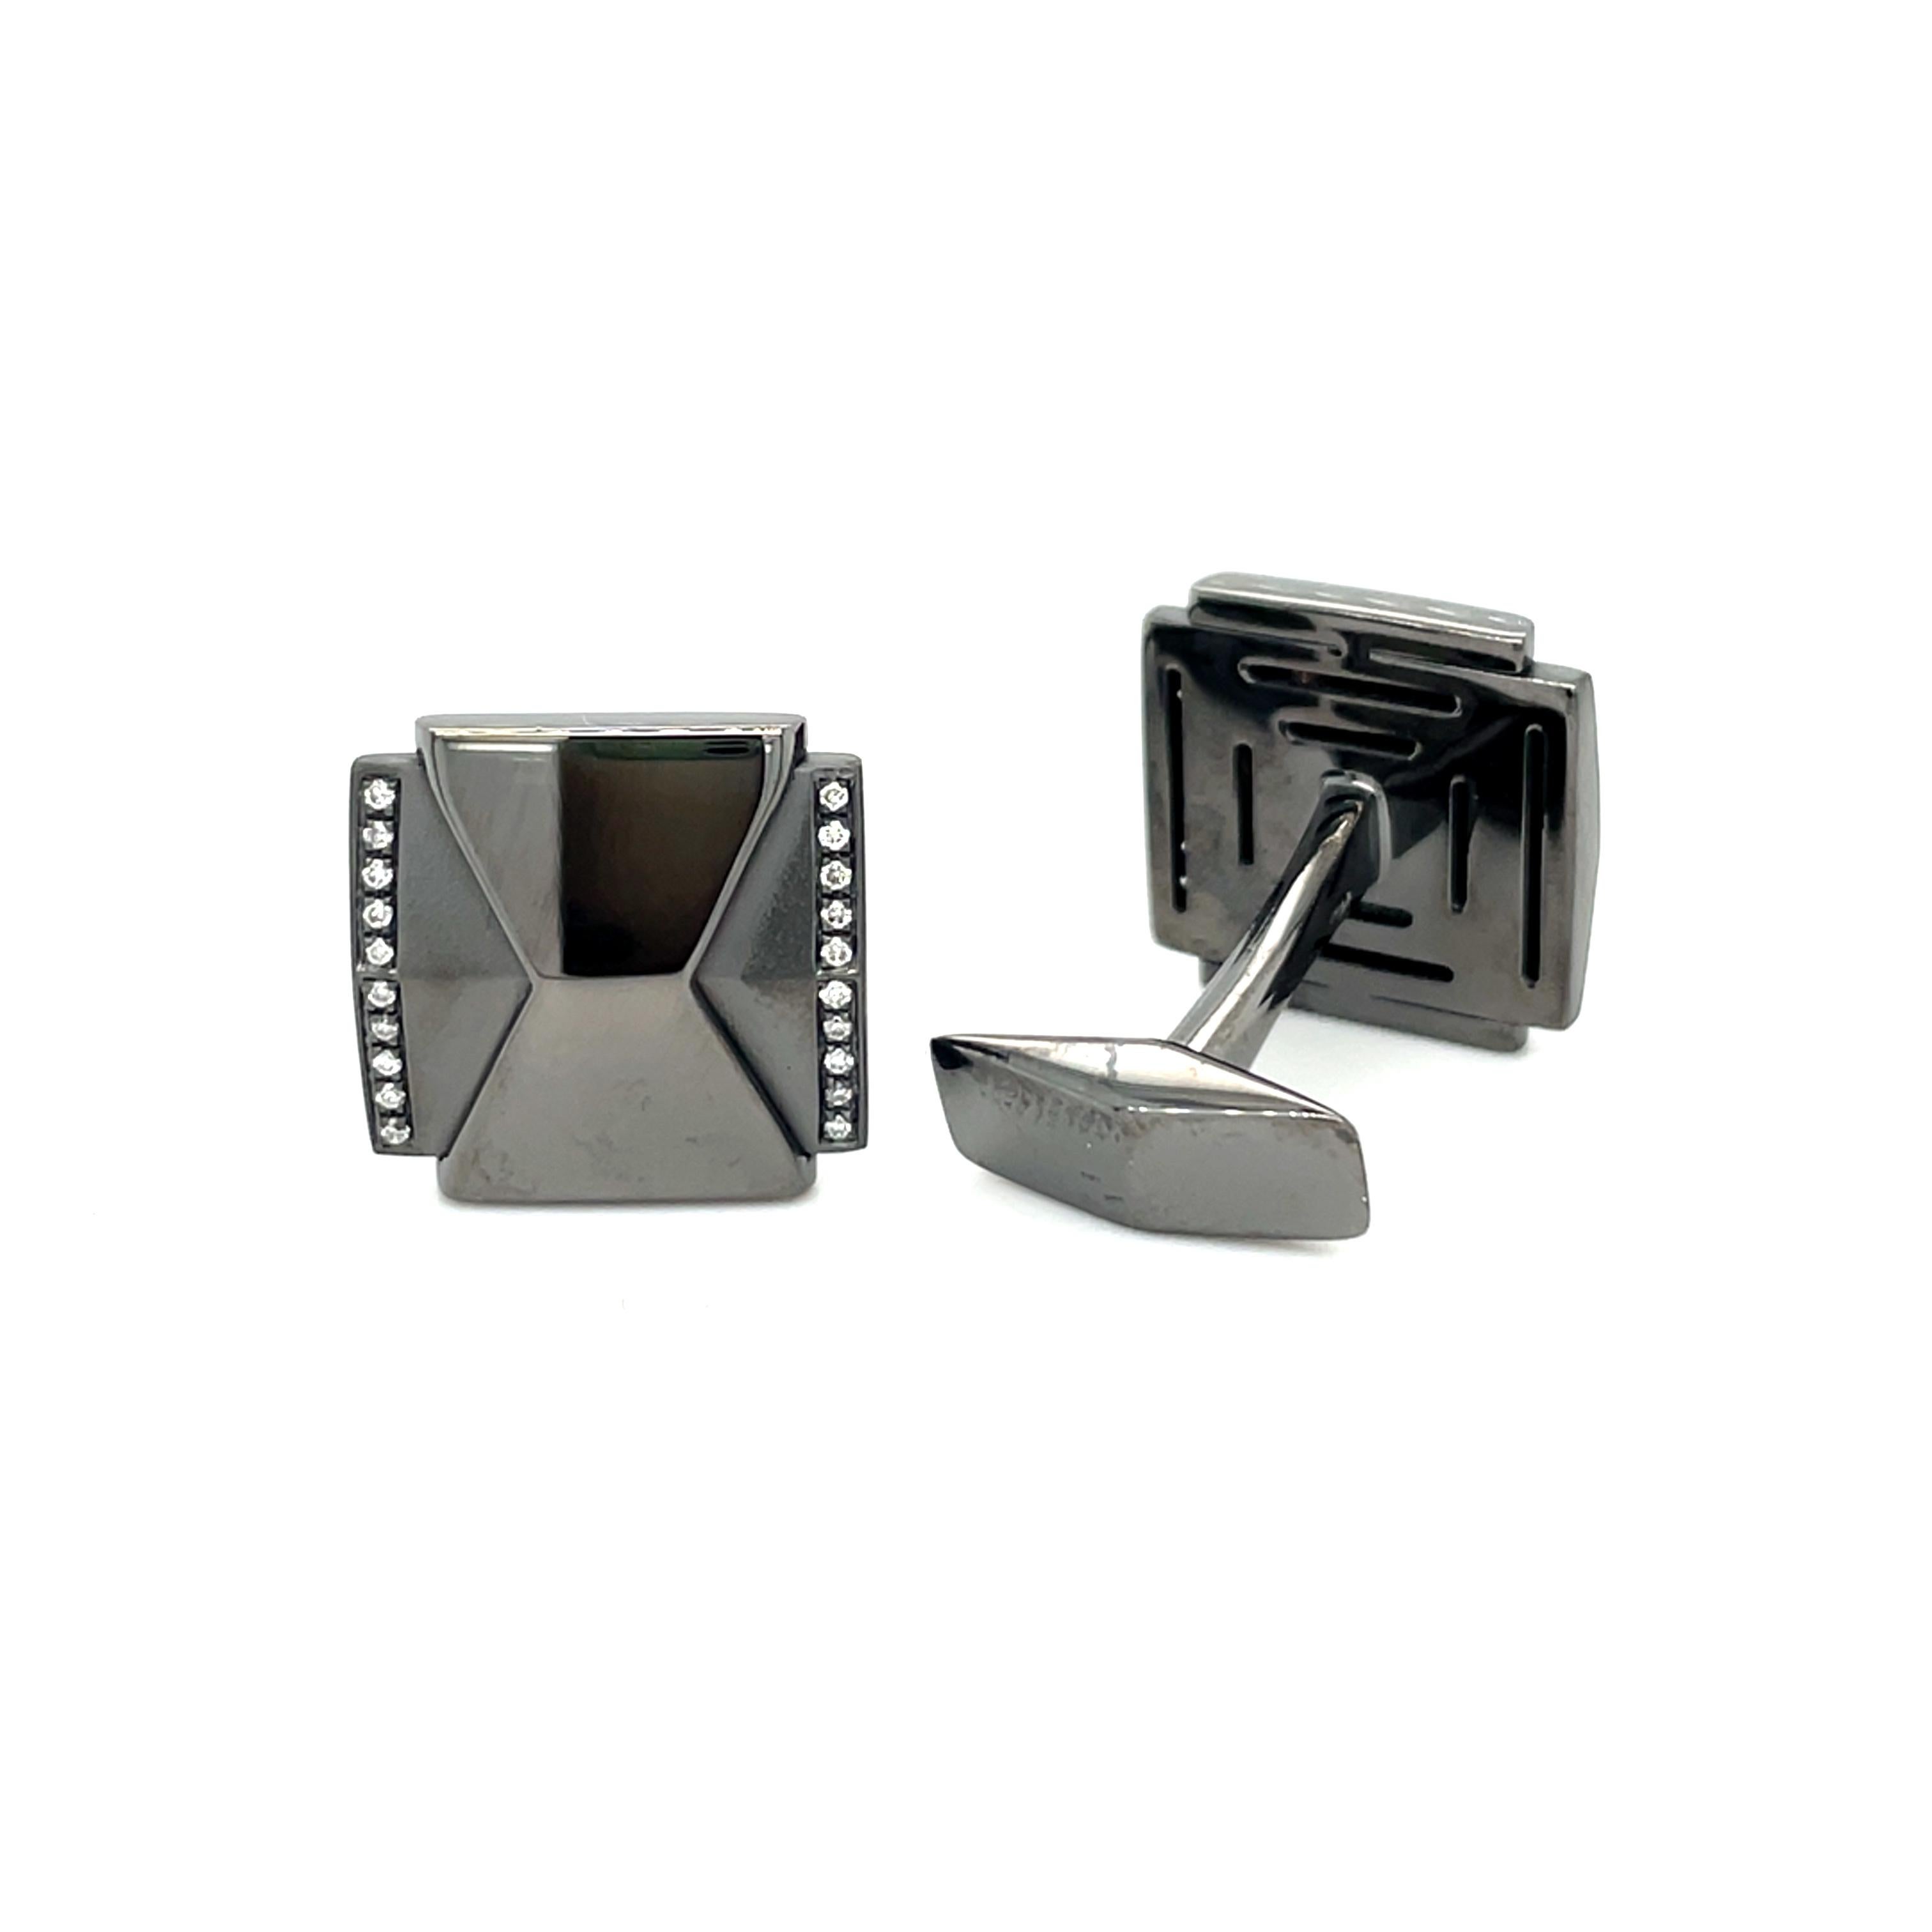 These white gold (black rhodium) cufflinks are from Men's Collection. These cufflinks are decorated with diamonds G color VS clarity. The total amount of it is 0.12 Carat. The dimensions of the cufflinks are 1.8cm x 1.5cm. These cufflinks are a